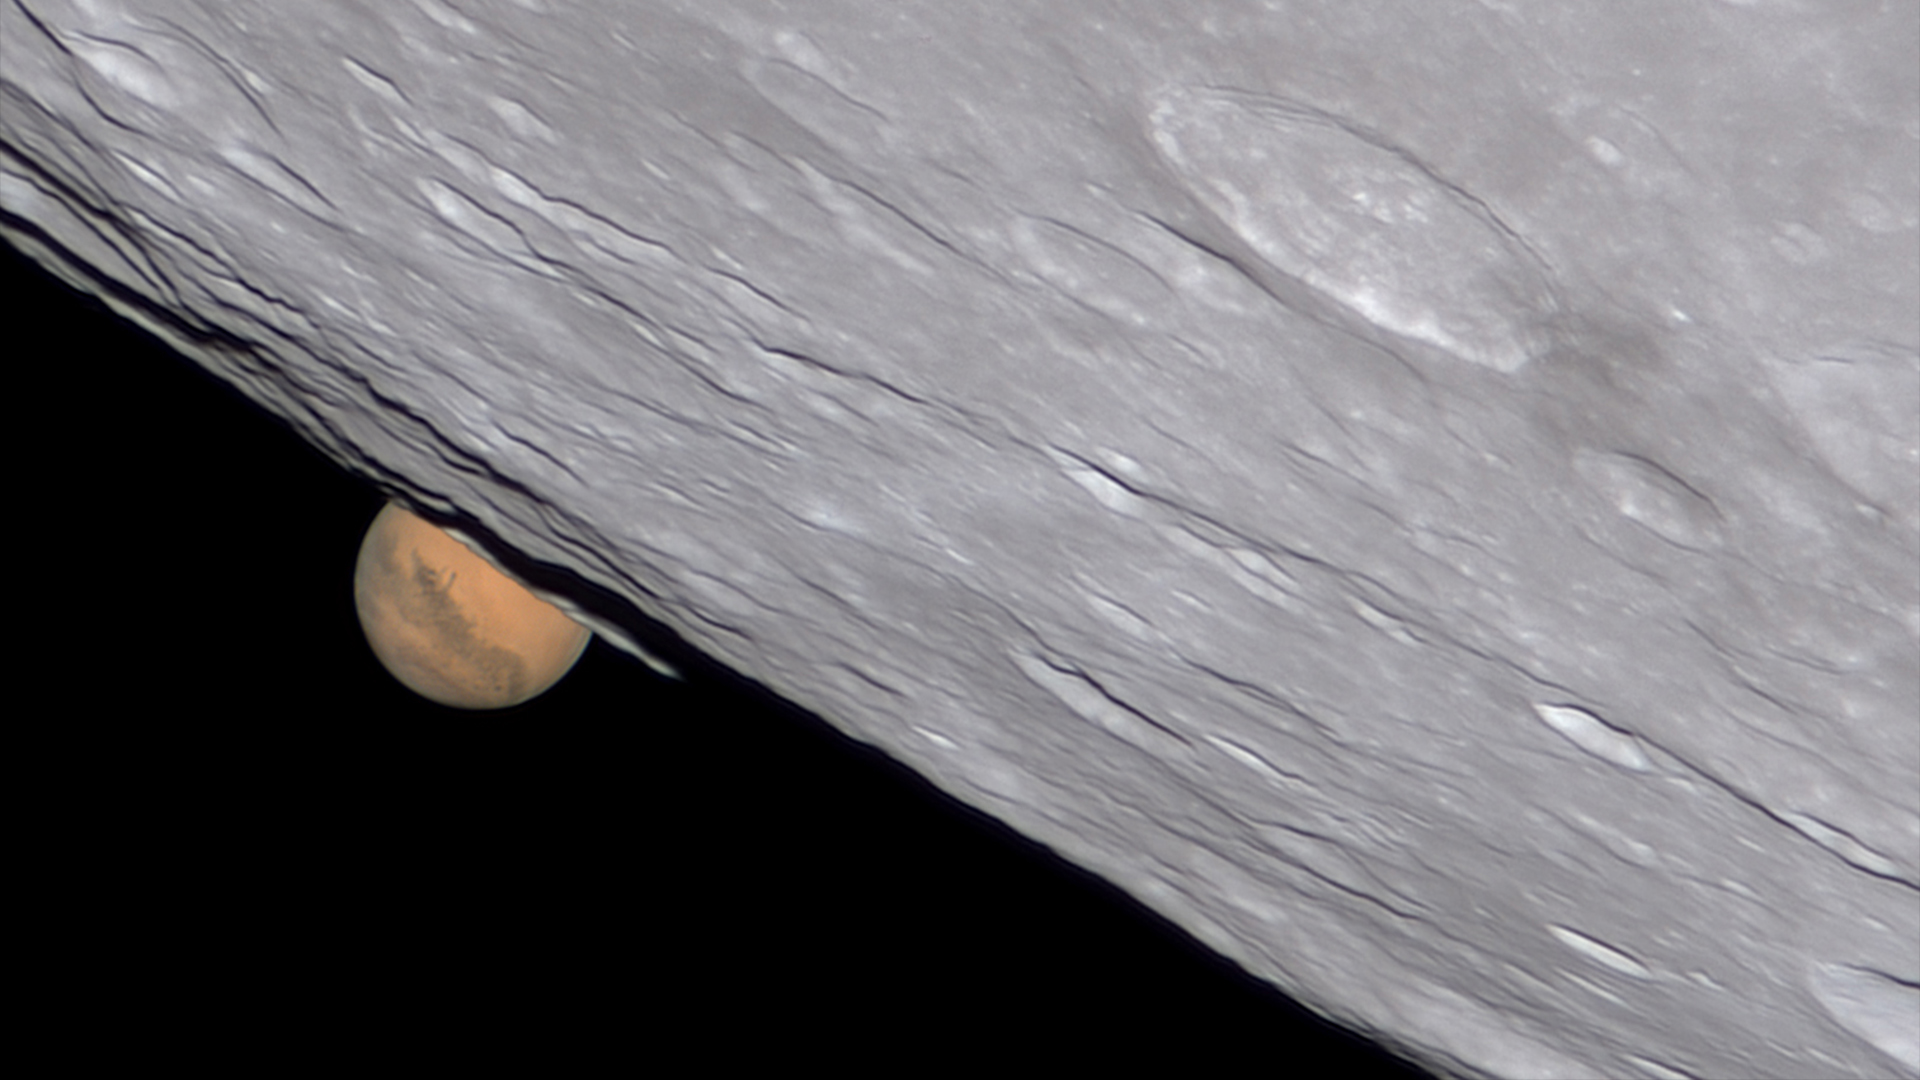 Mars peaks over the surface of the moon.